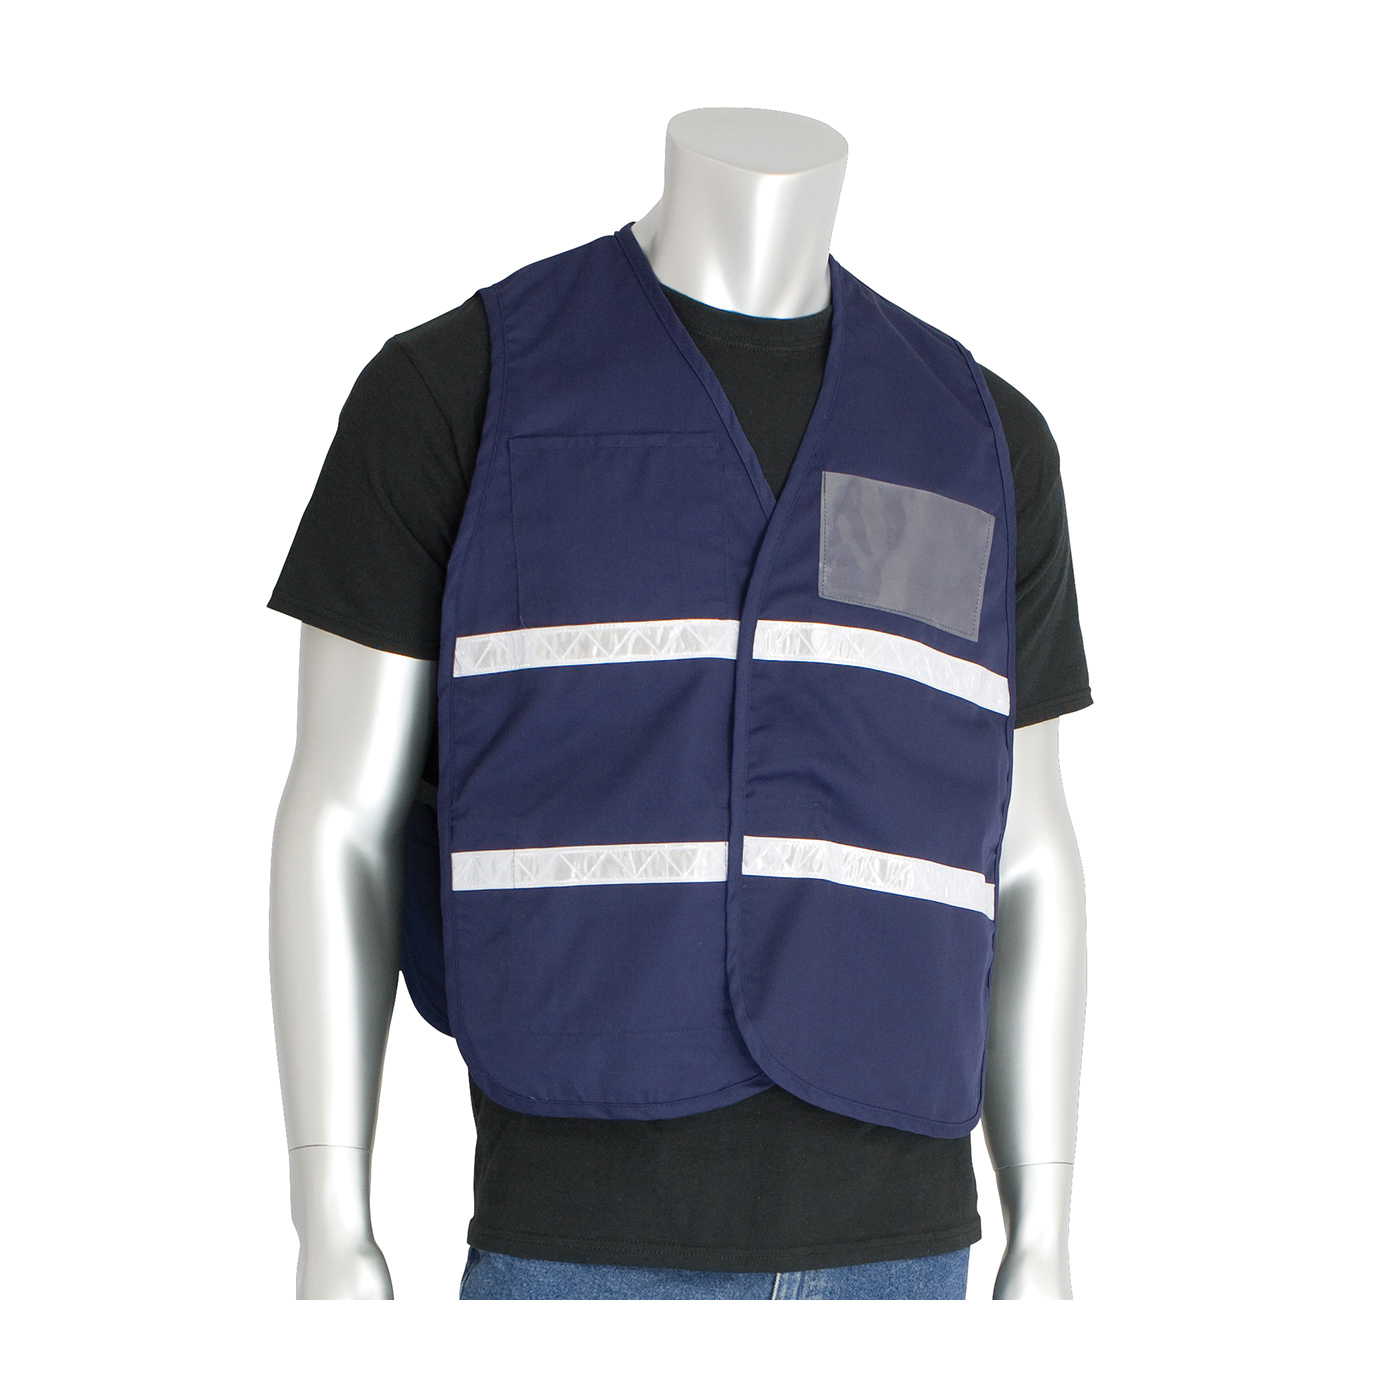 PIP® 300-2503 Non-ANSI Incident Command Vest, Dark Blue, 35% Cotton/65% Polyester, Hook and Loop Closure, 4 Pockets